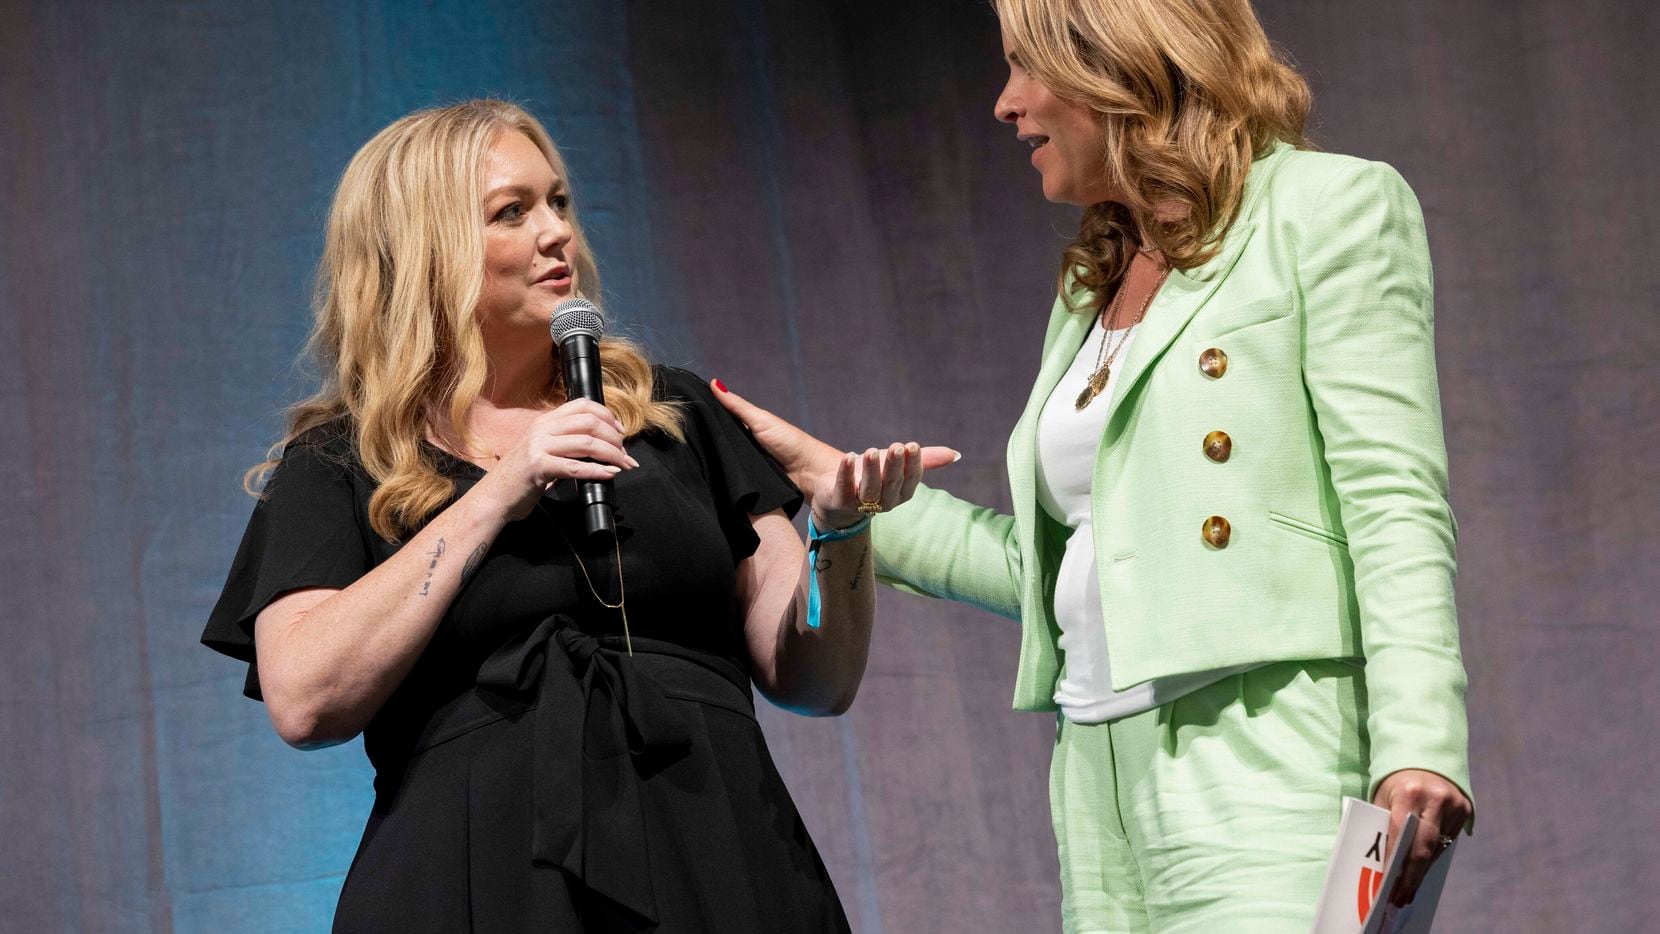 Author Colleen Hoover and "Today Show" co-host Jenna Bush Hager chat onstage before a panel...